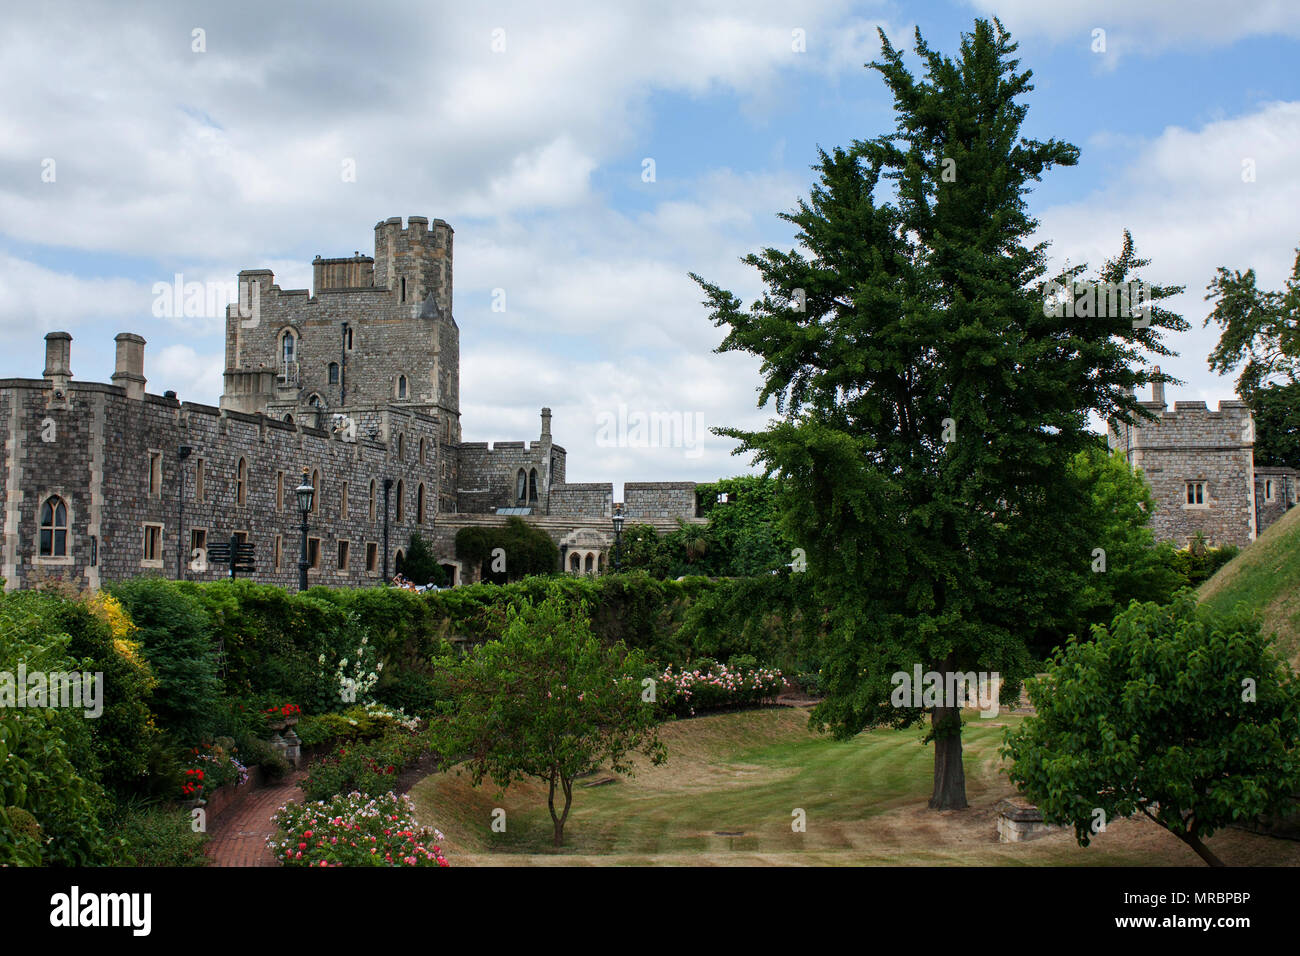 Inner garden surrounding the round tower in the middle ward of Windsor castle, residence of the british royal family in England, UK. Stock Photo